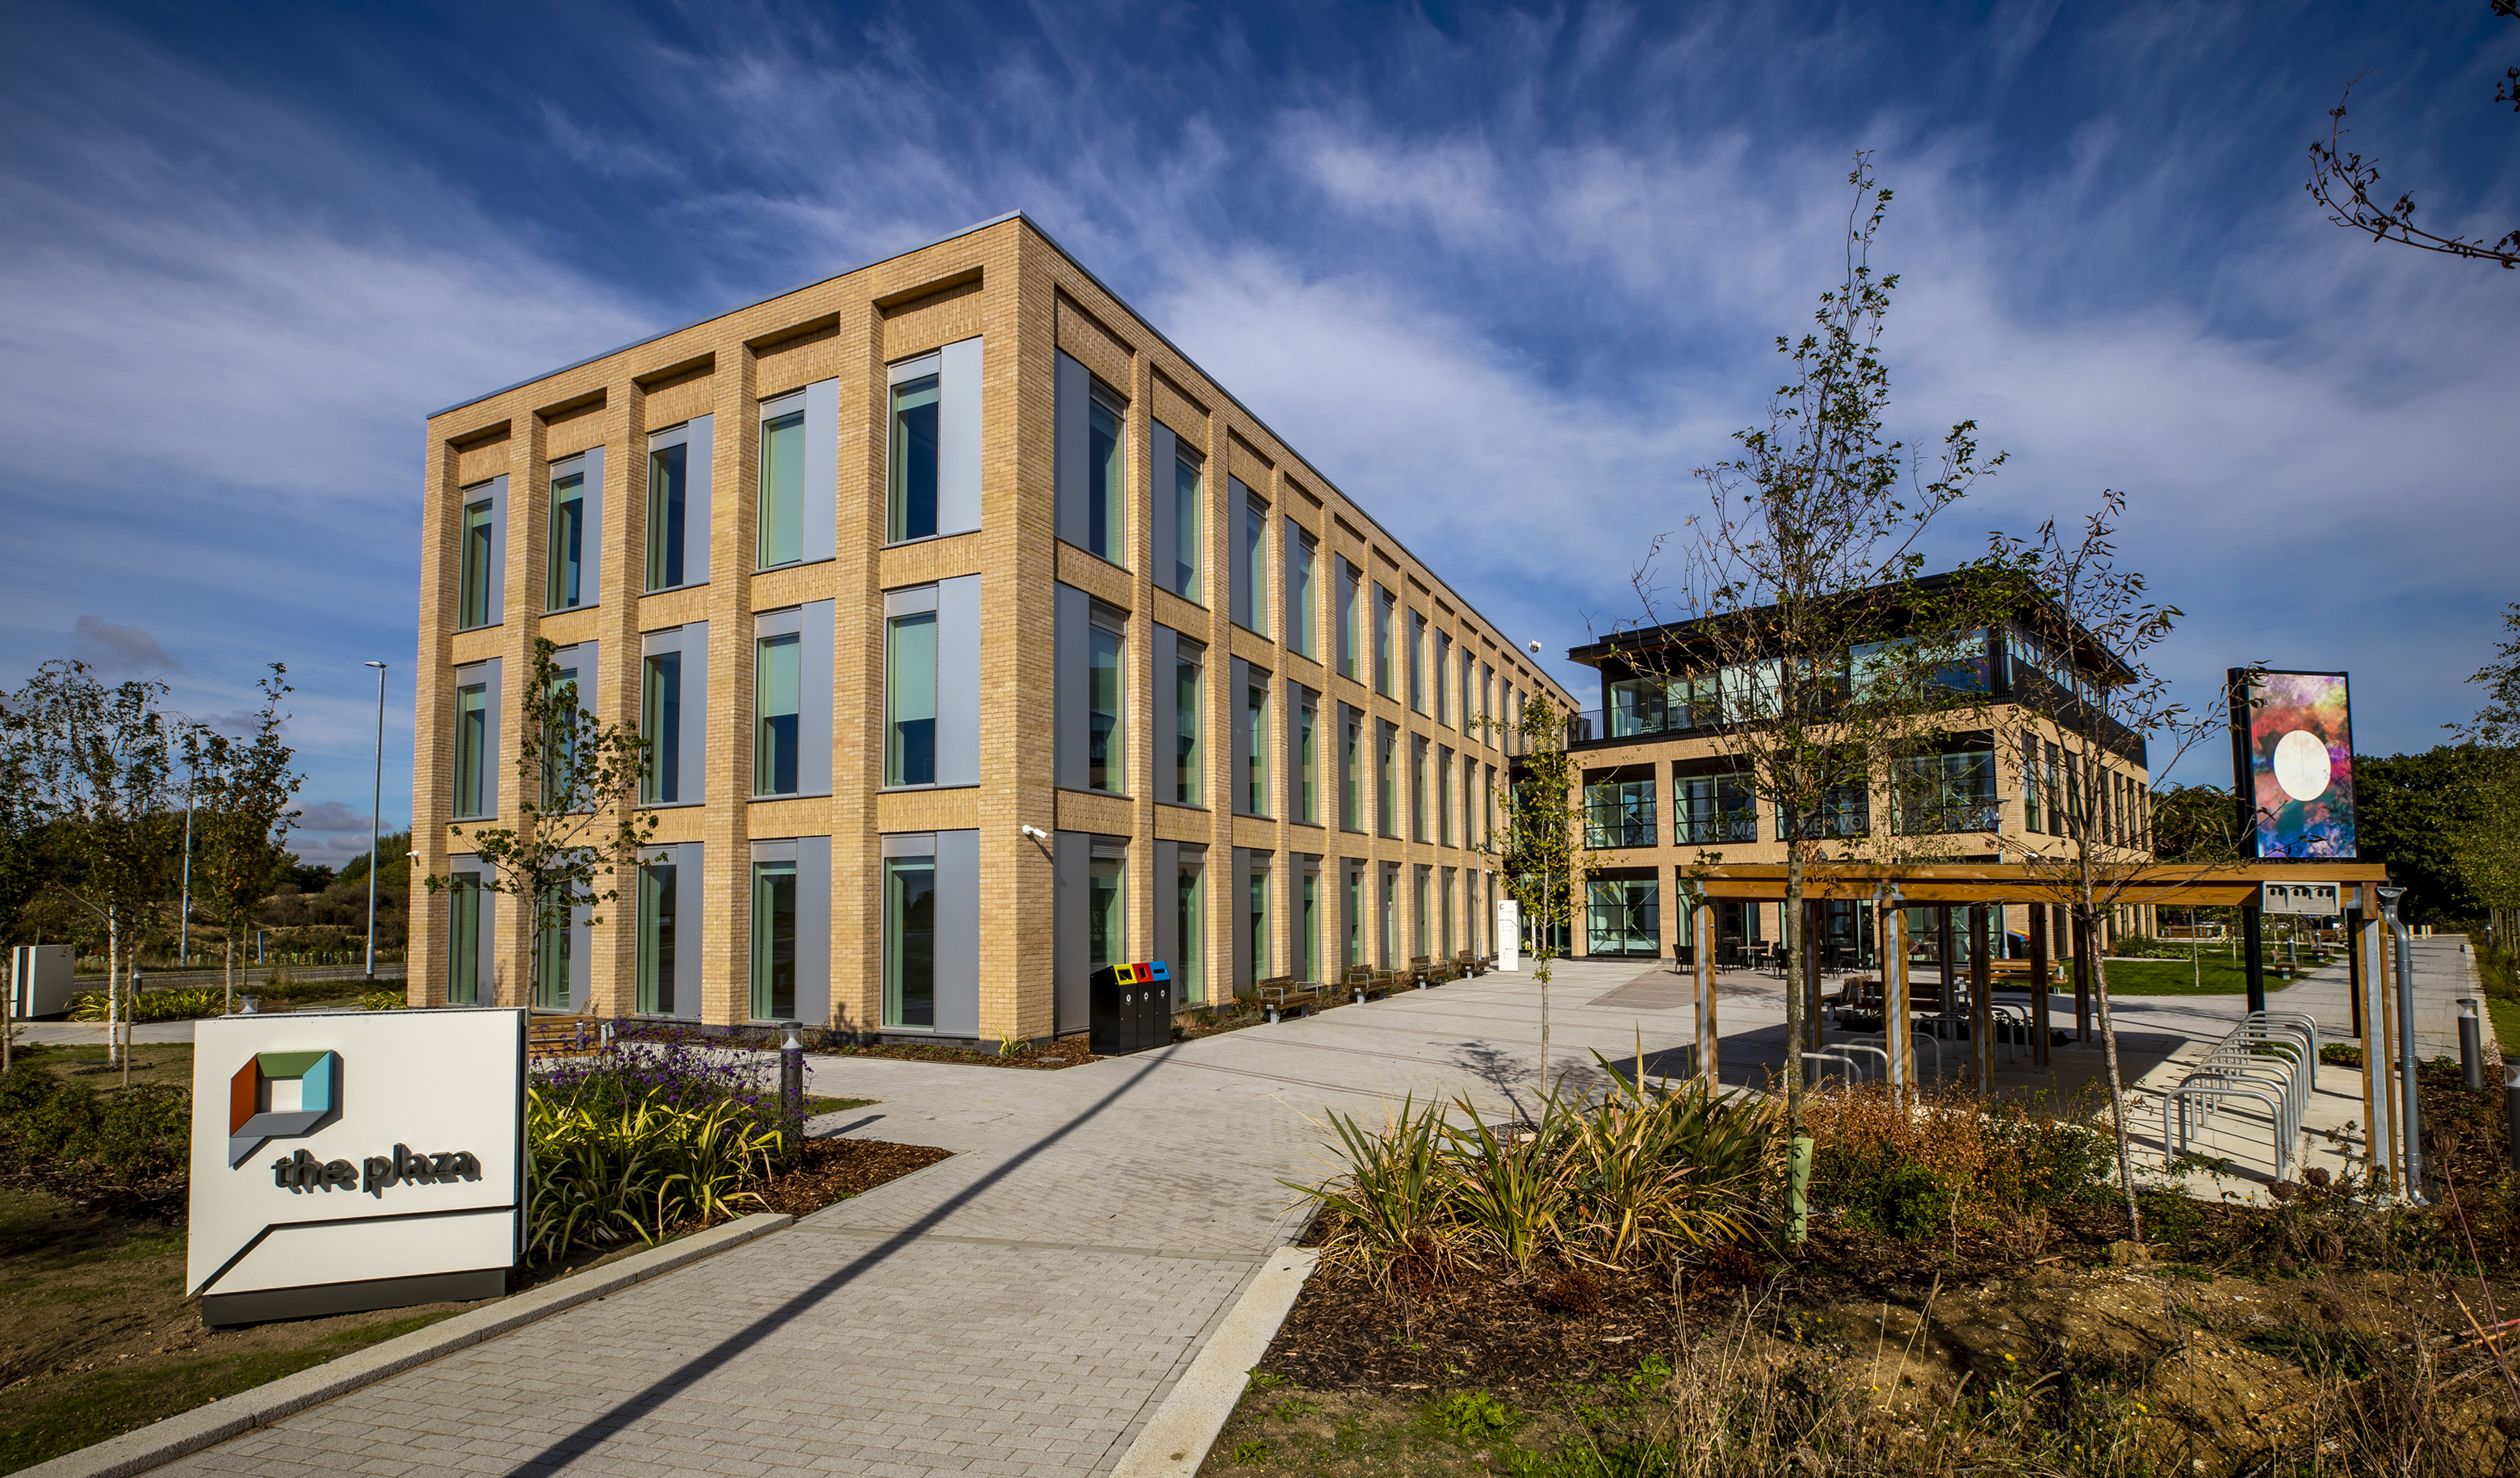 The Plaza Enterprise and innovation centre in Great Notley